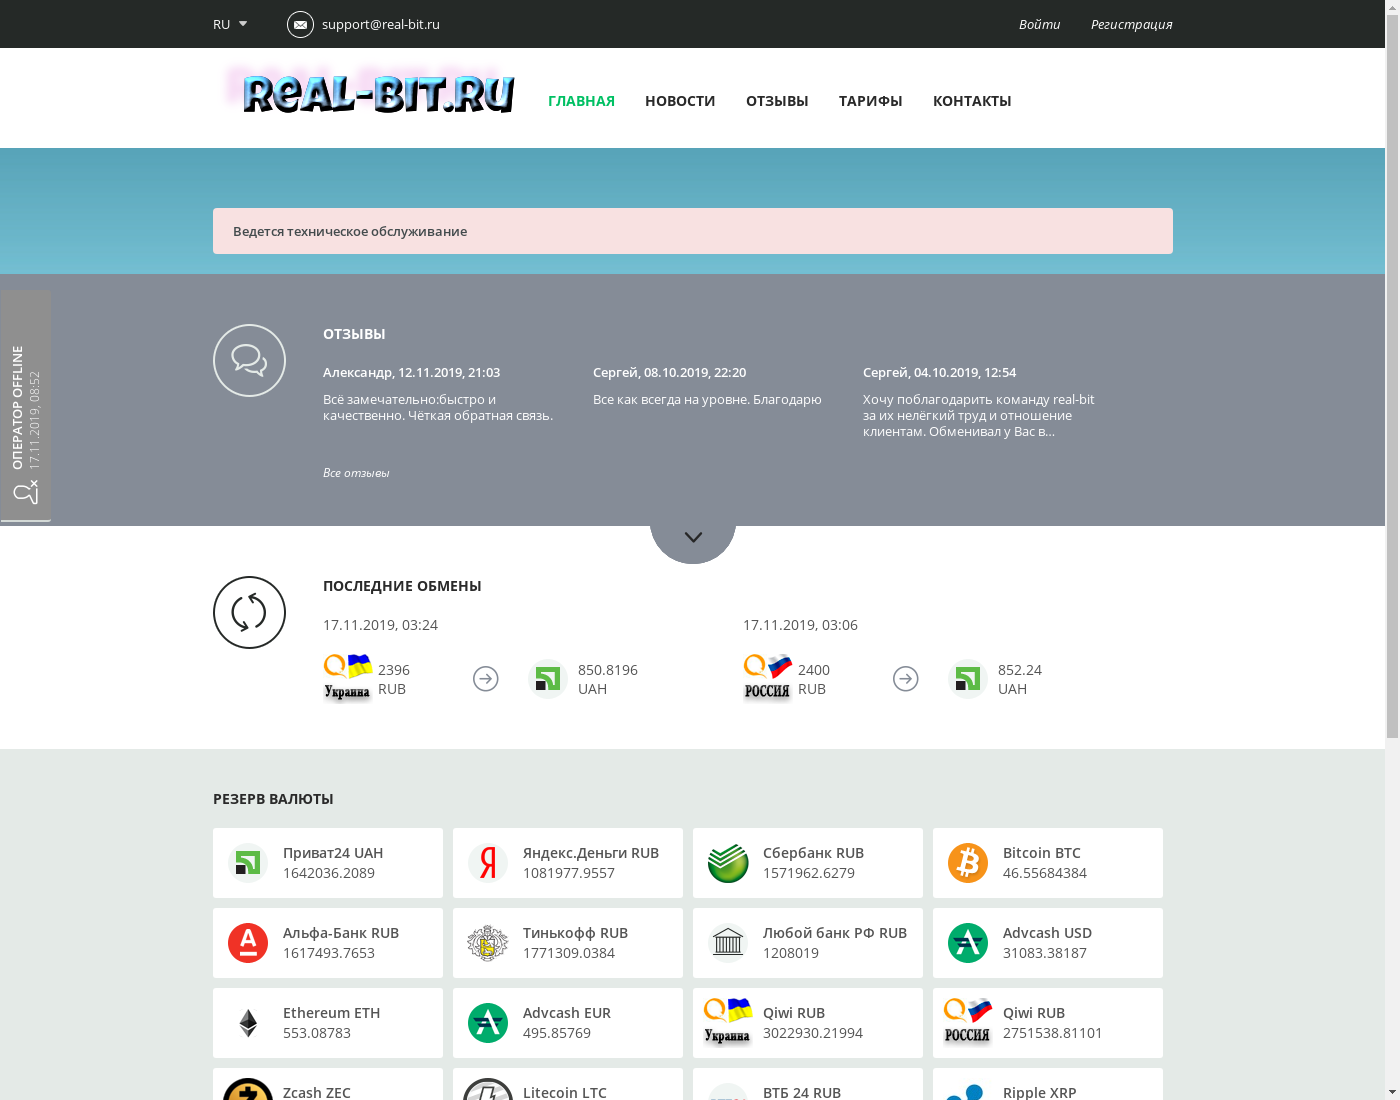 Real-Bit user interface: the home page in English